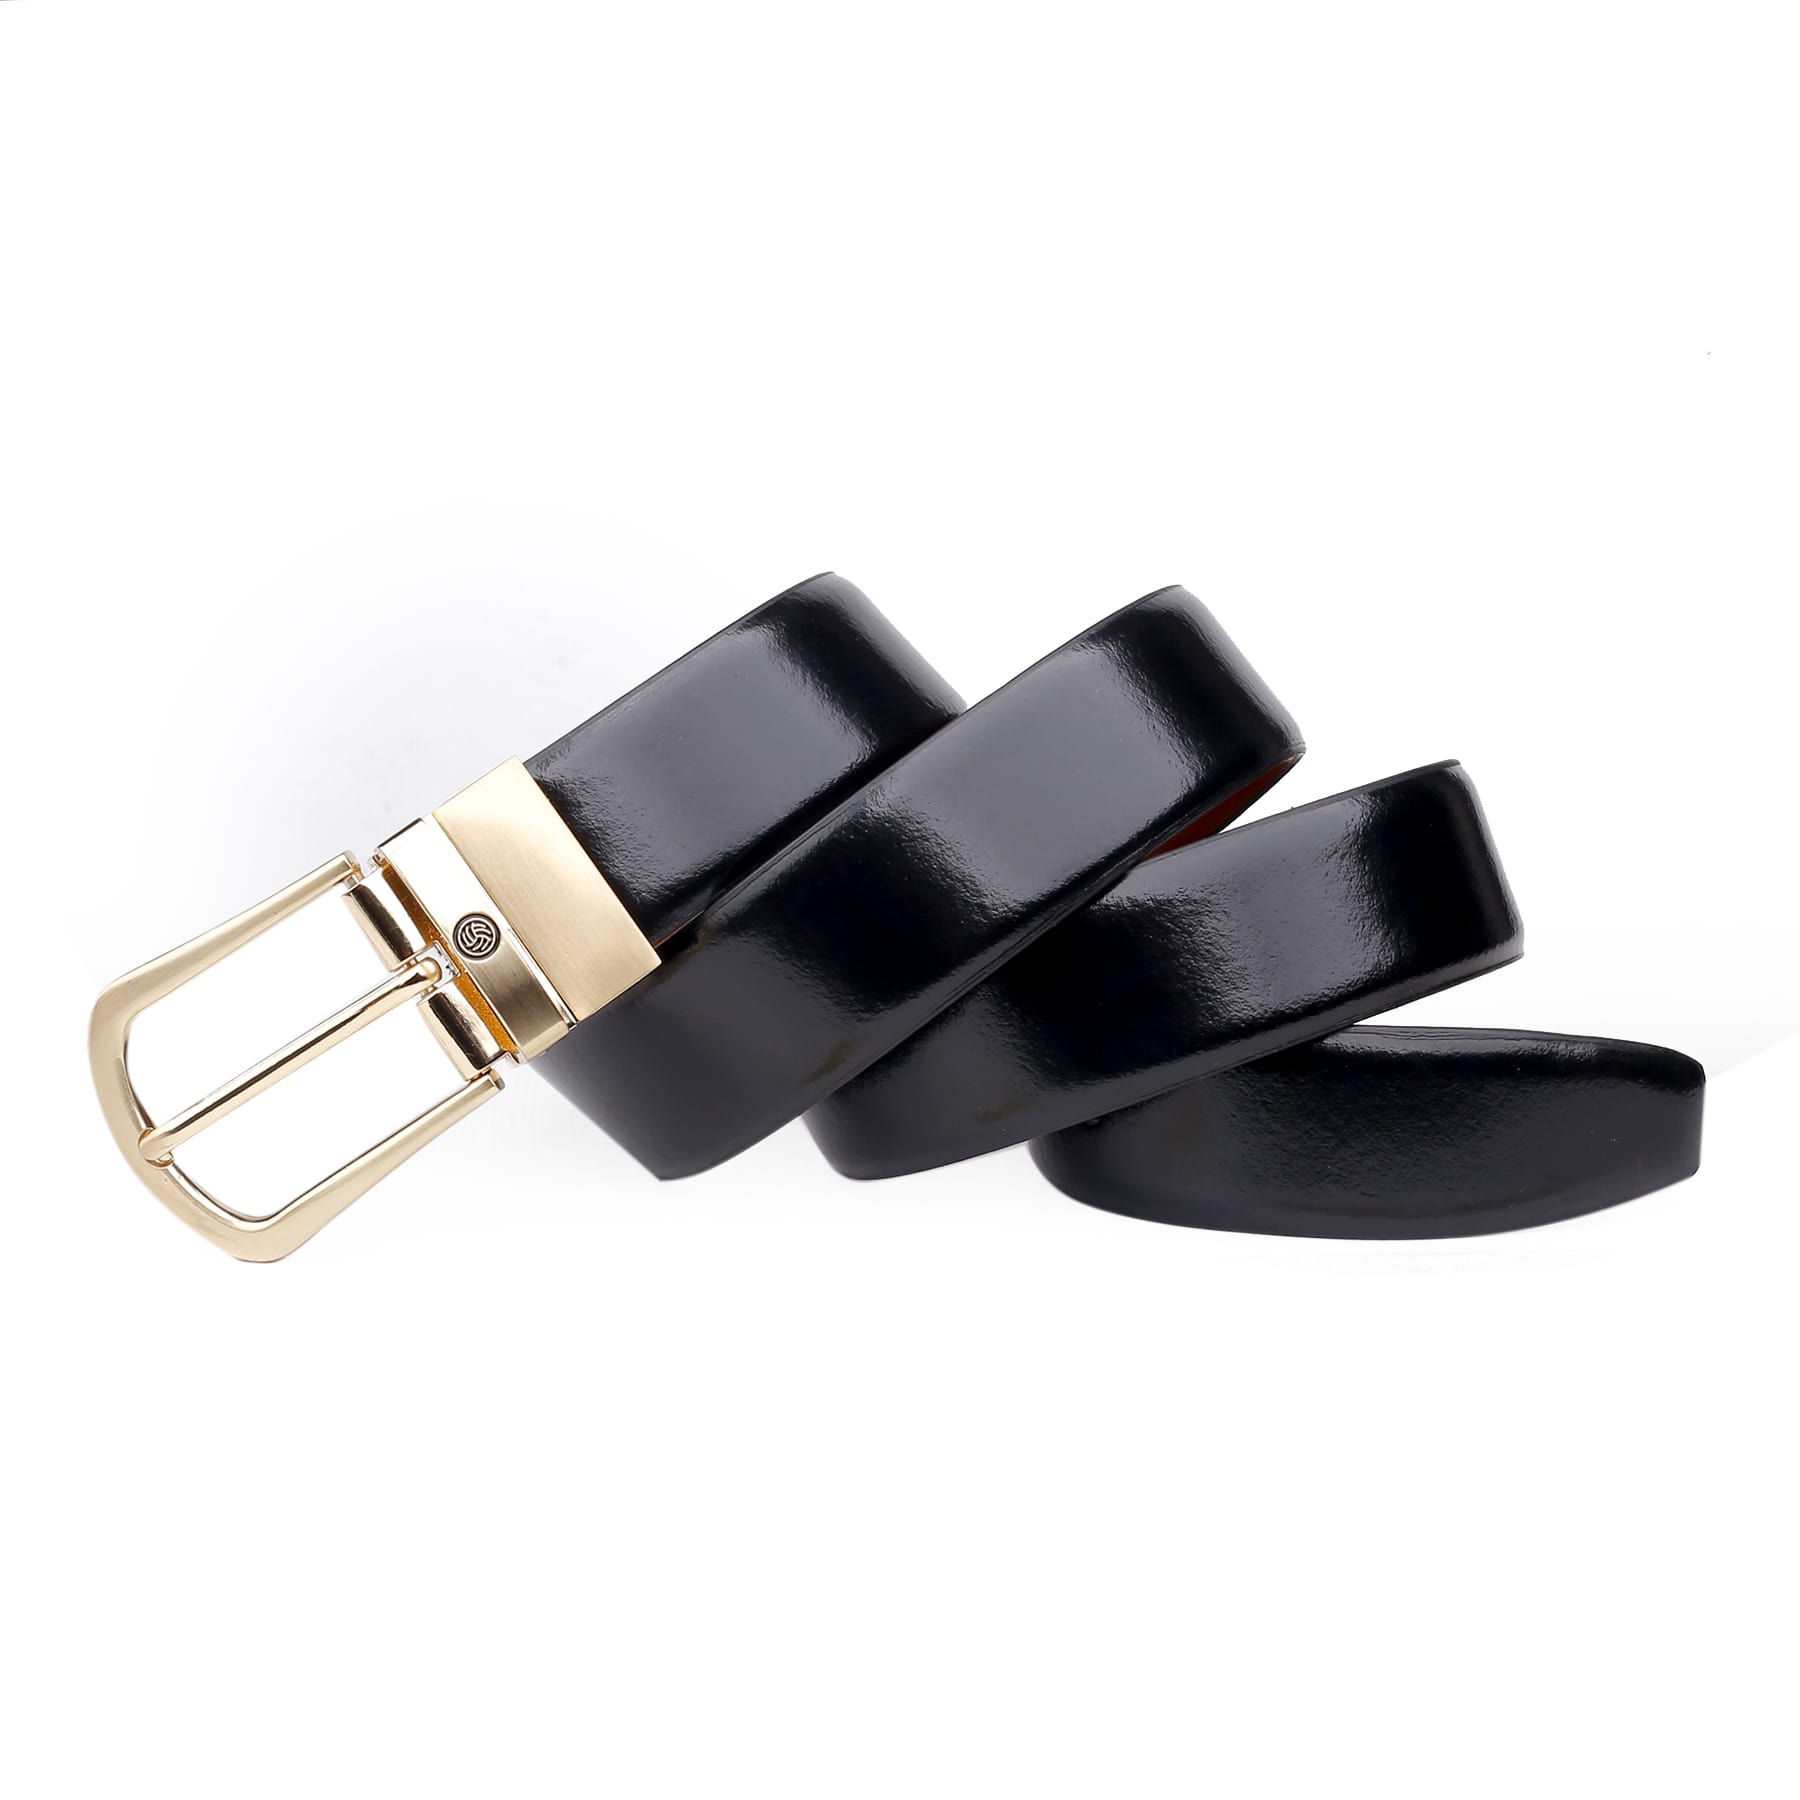 Bacca Bucci Reversible Leather Formal Dress Belts with a Stylish Finish and Nickel-Free Buckle